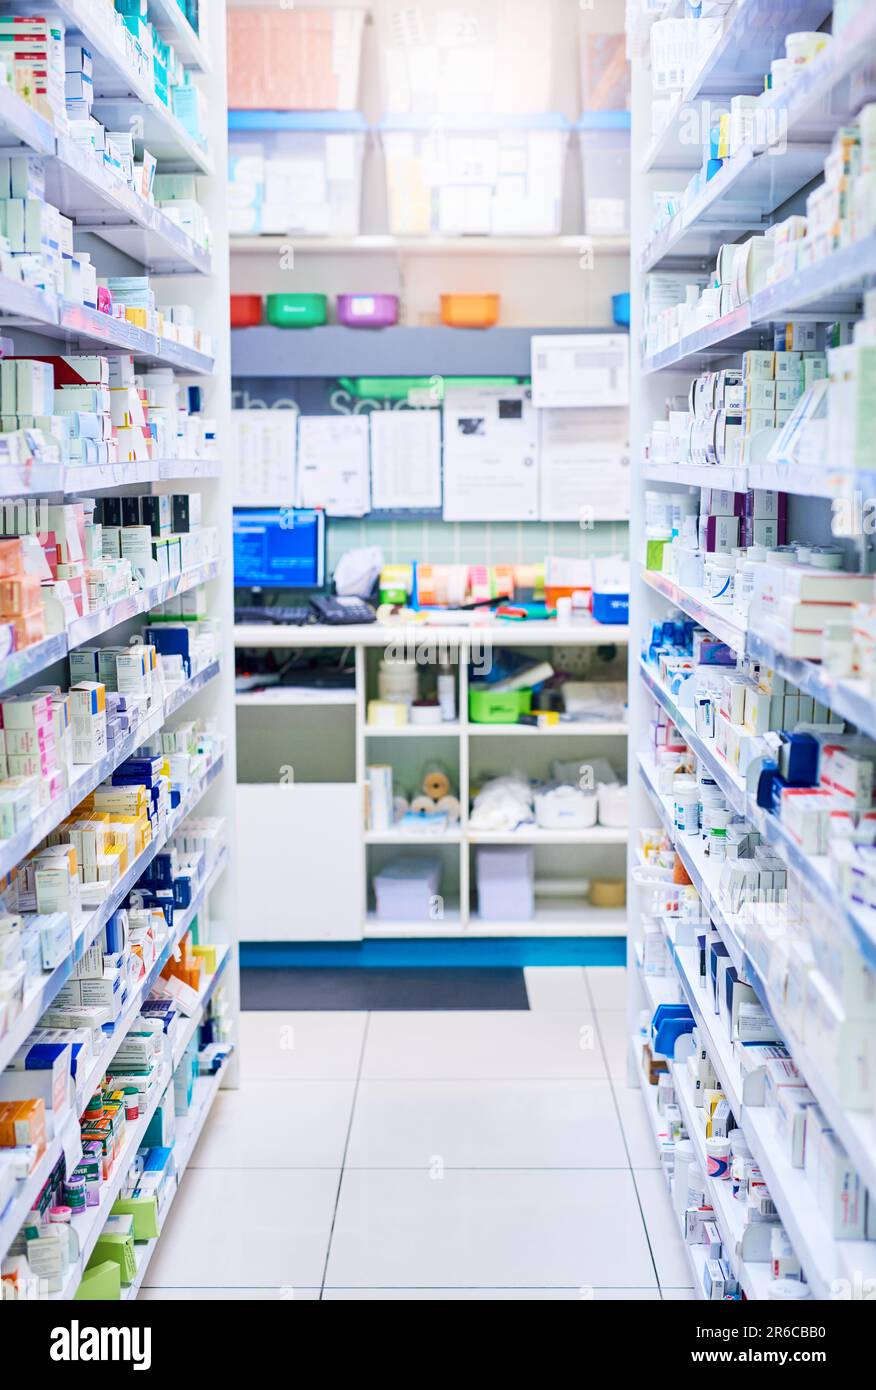 https://c8.alamy.com/comp/2R6CBB0/pharmacy-shelf-and-boxes-for-wellness-empty-or-pharmaceutical-stock-for-product-health-and-interior-shop-store-and-retail-healthcare-with-storage-2R6CBB0.jpg